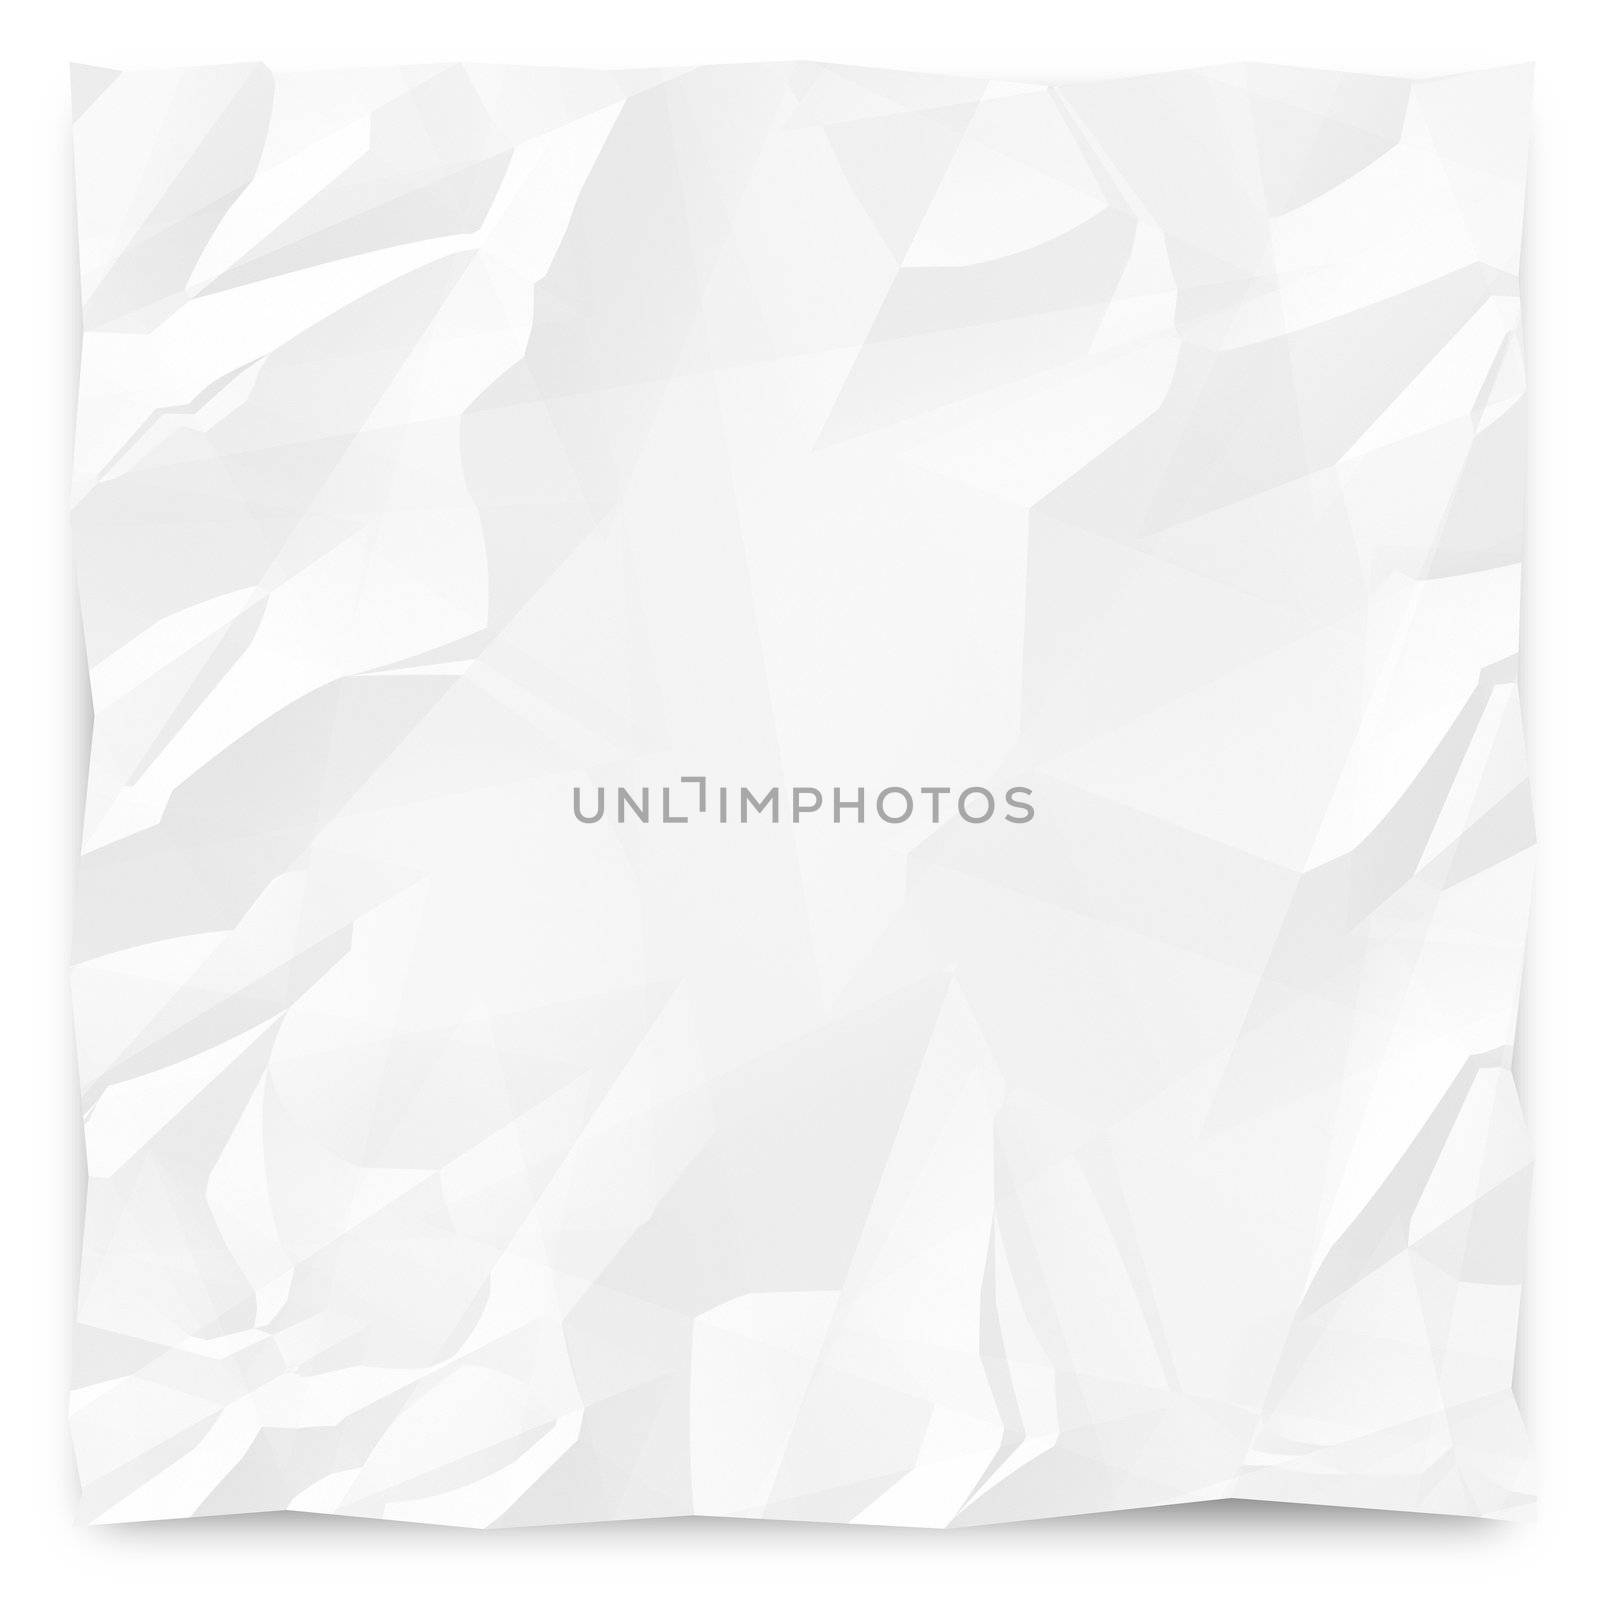 A white, wrinkled piece of paper background for slides, brochures and presentations.